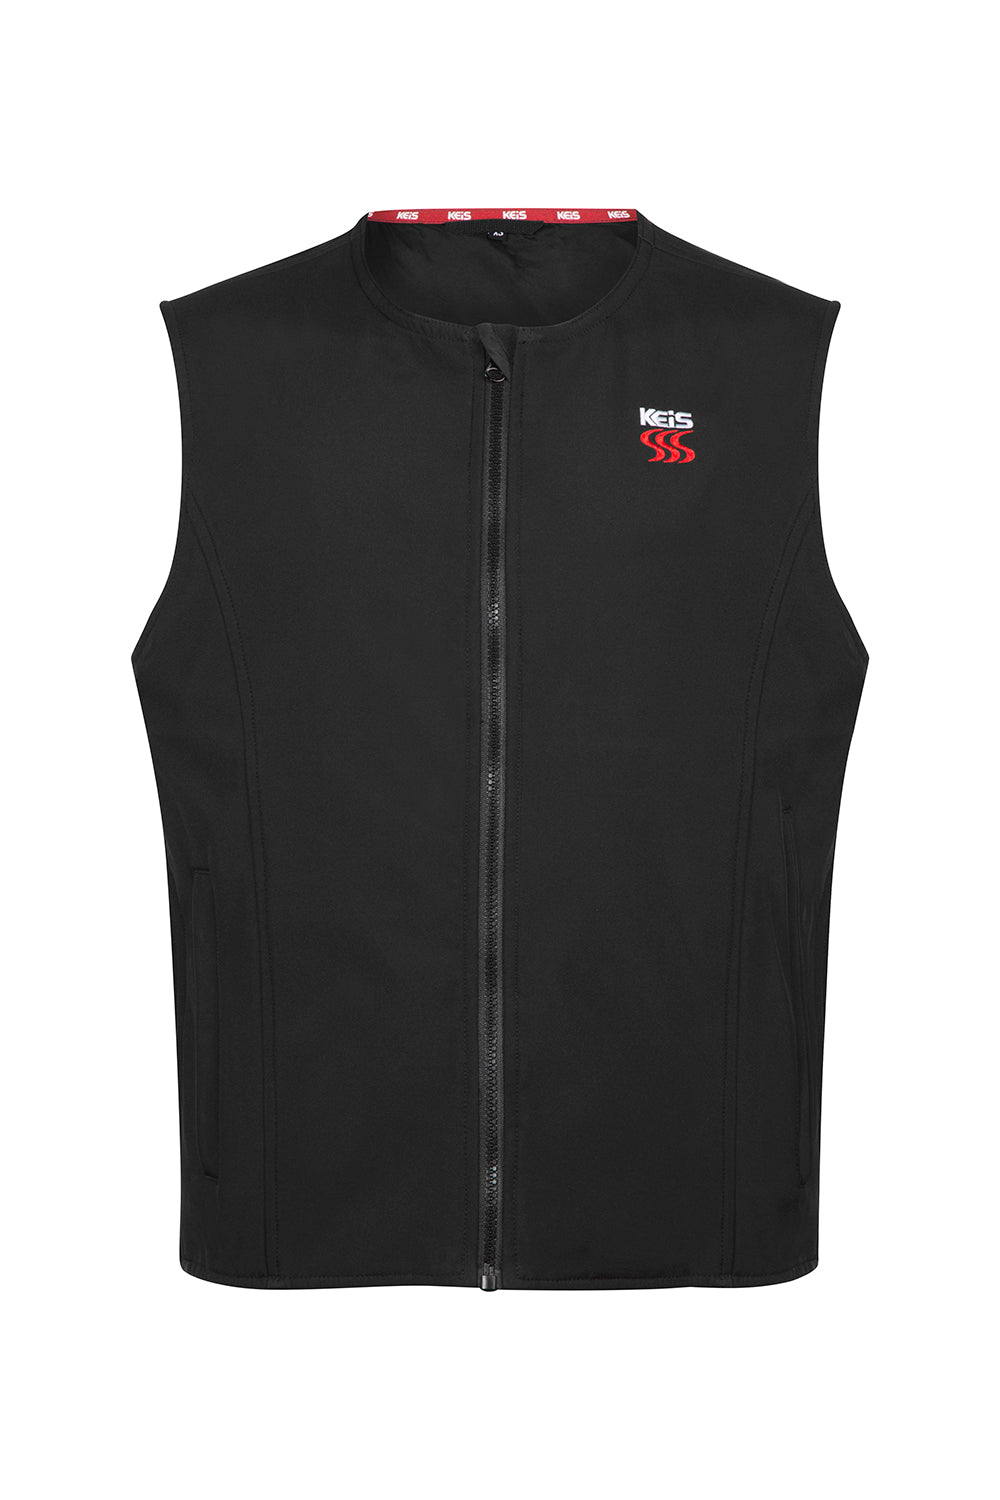 motorcycling, skiing, or hiking, keep warm with a Keis heated vest